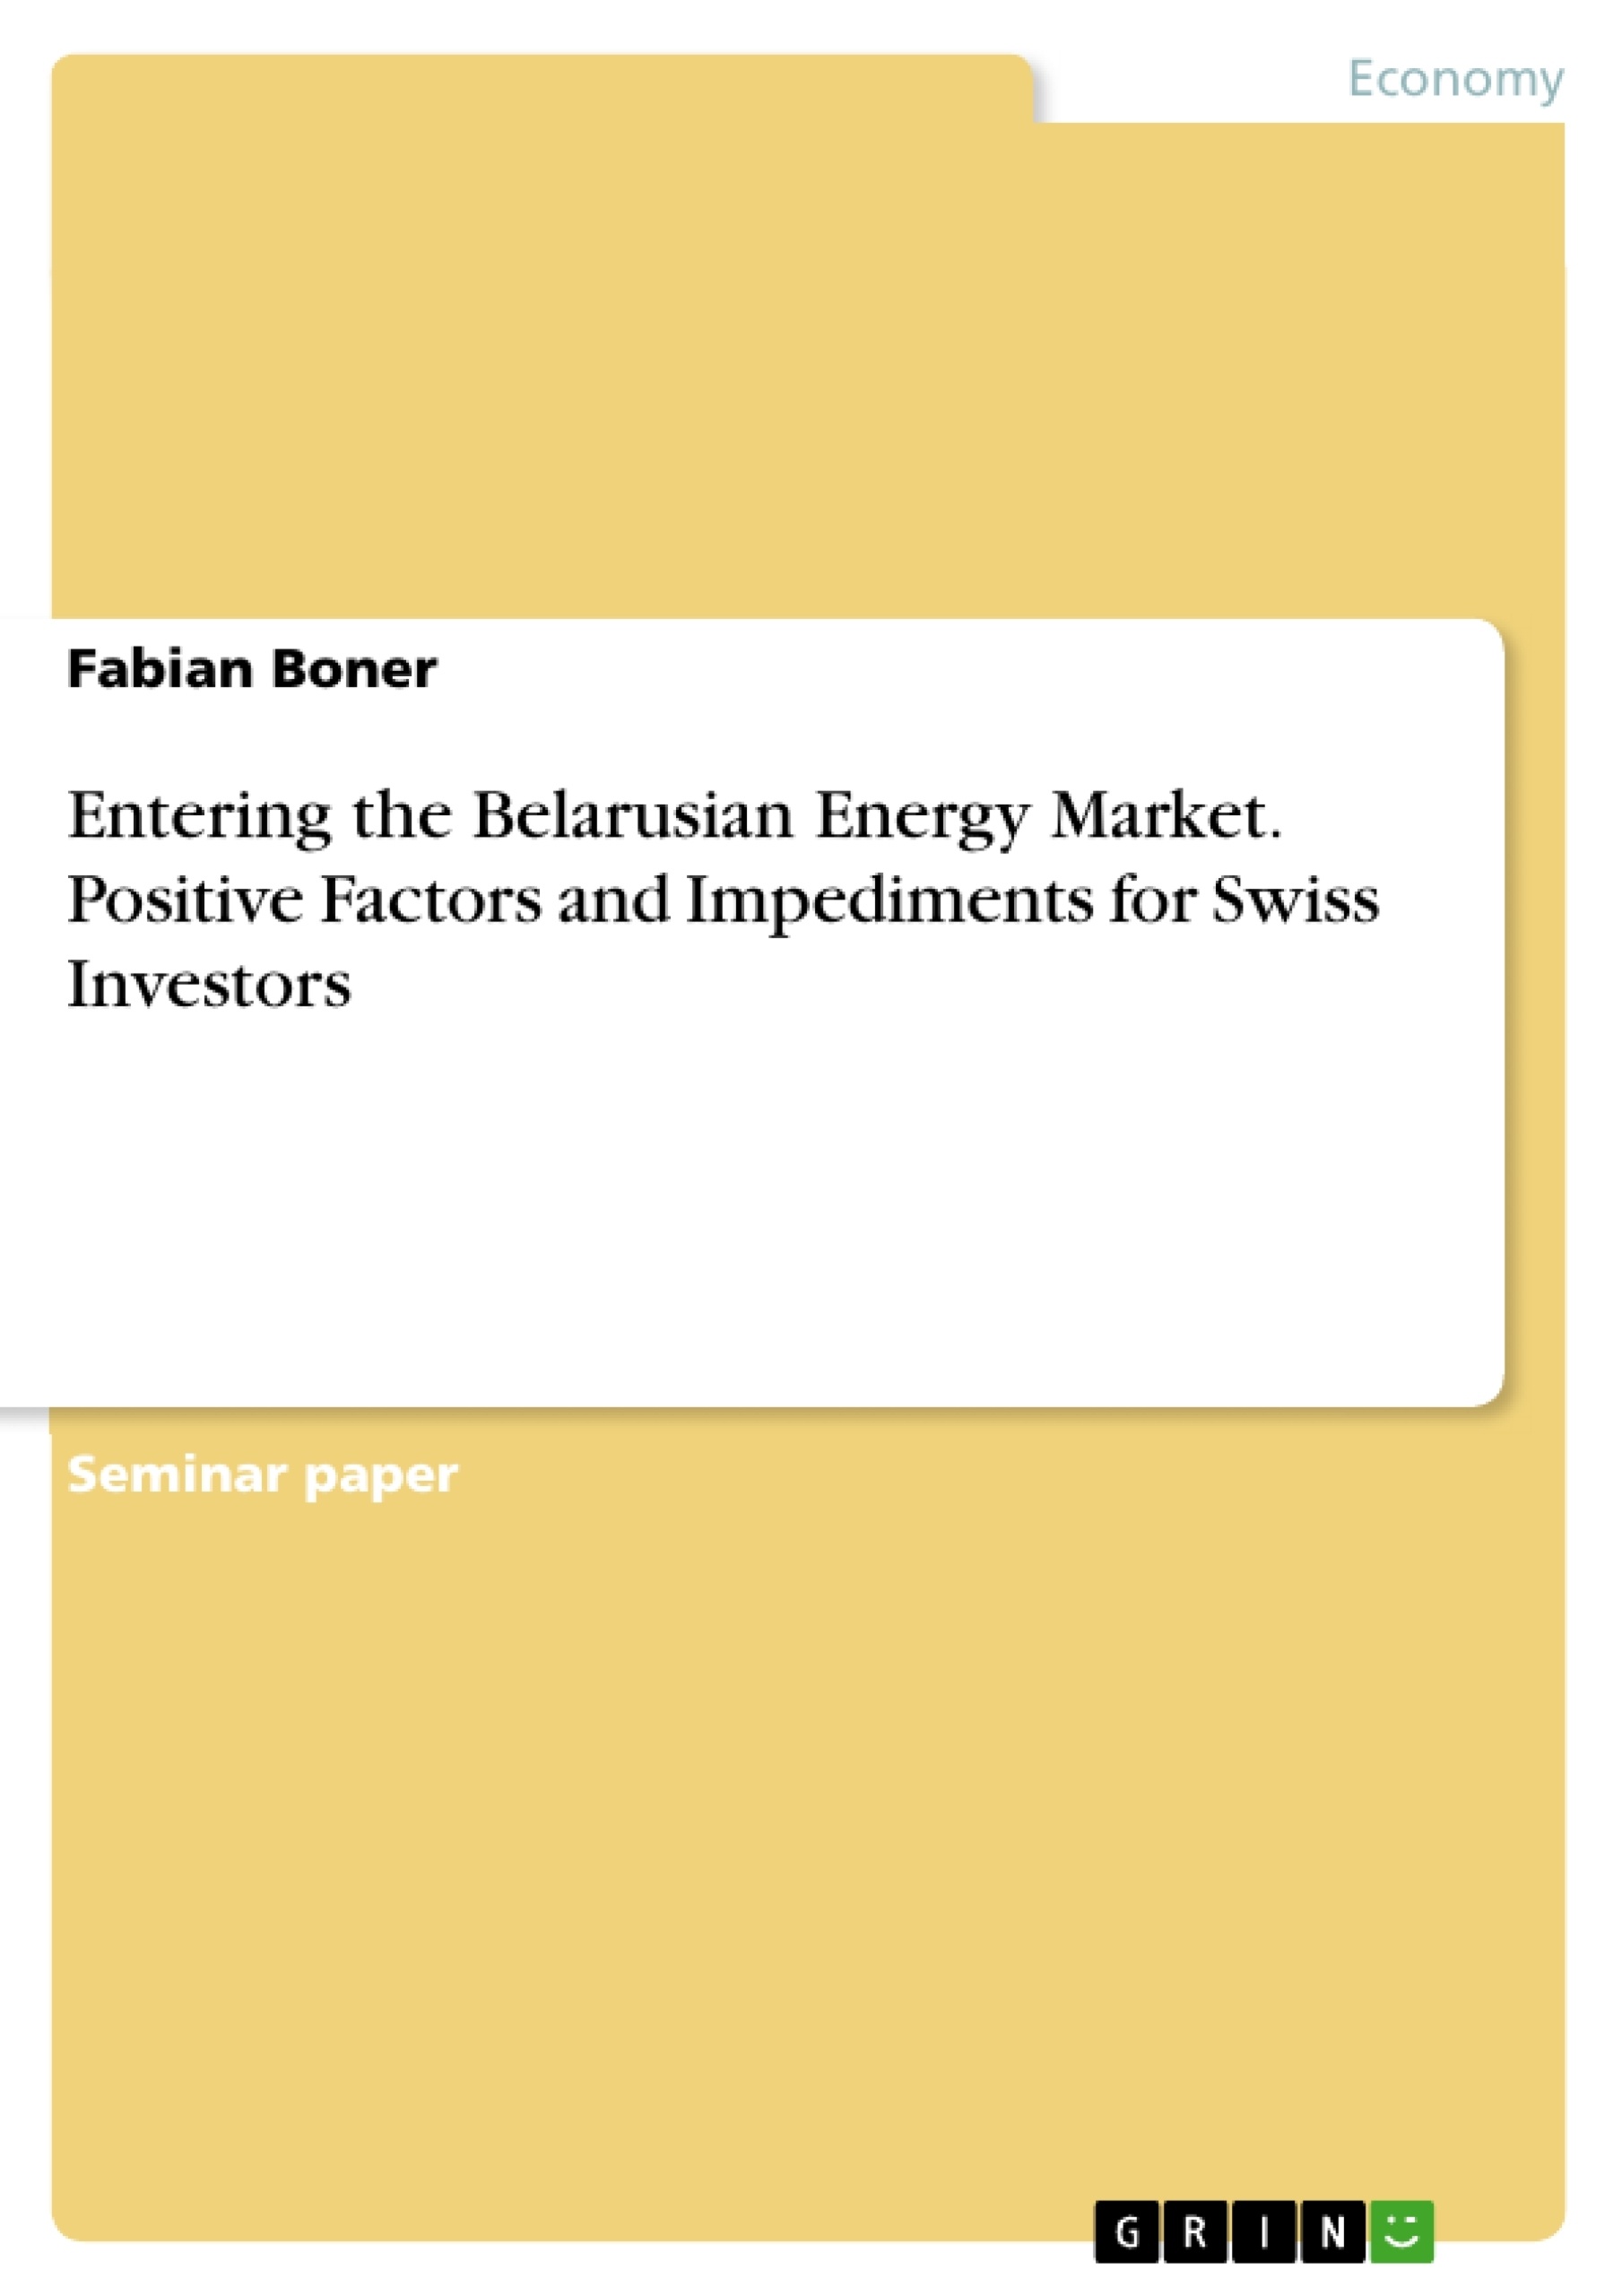 Título: Entering the Belarusian Energy Market. Positive Factors and Impediments for Swiss Investors